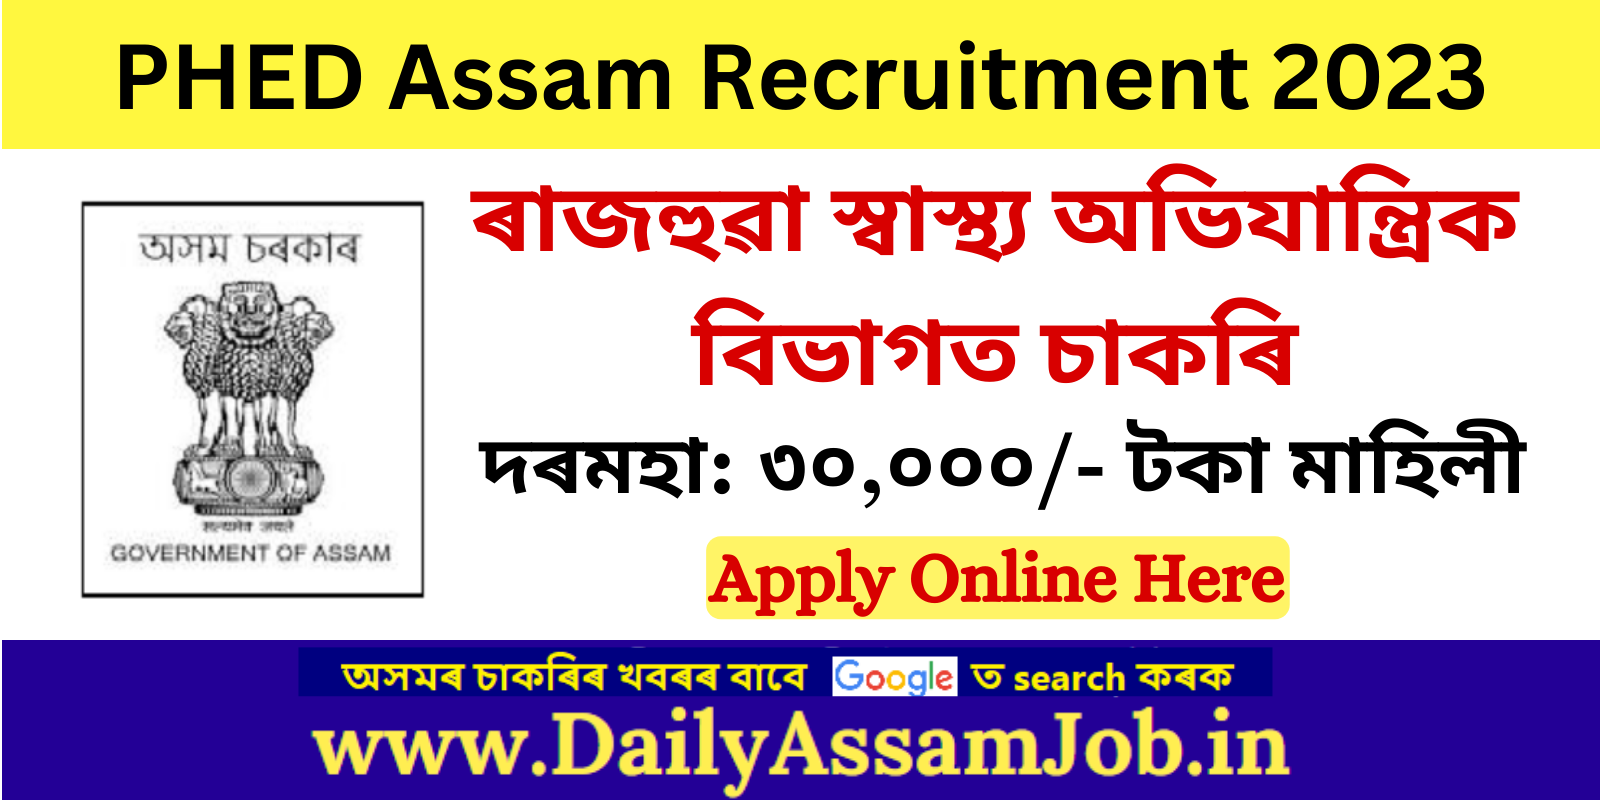 Assam Career :: PHED Assam Recruitment for 345 AE & JE Vacancy